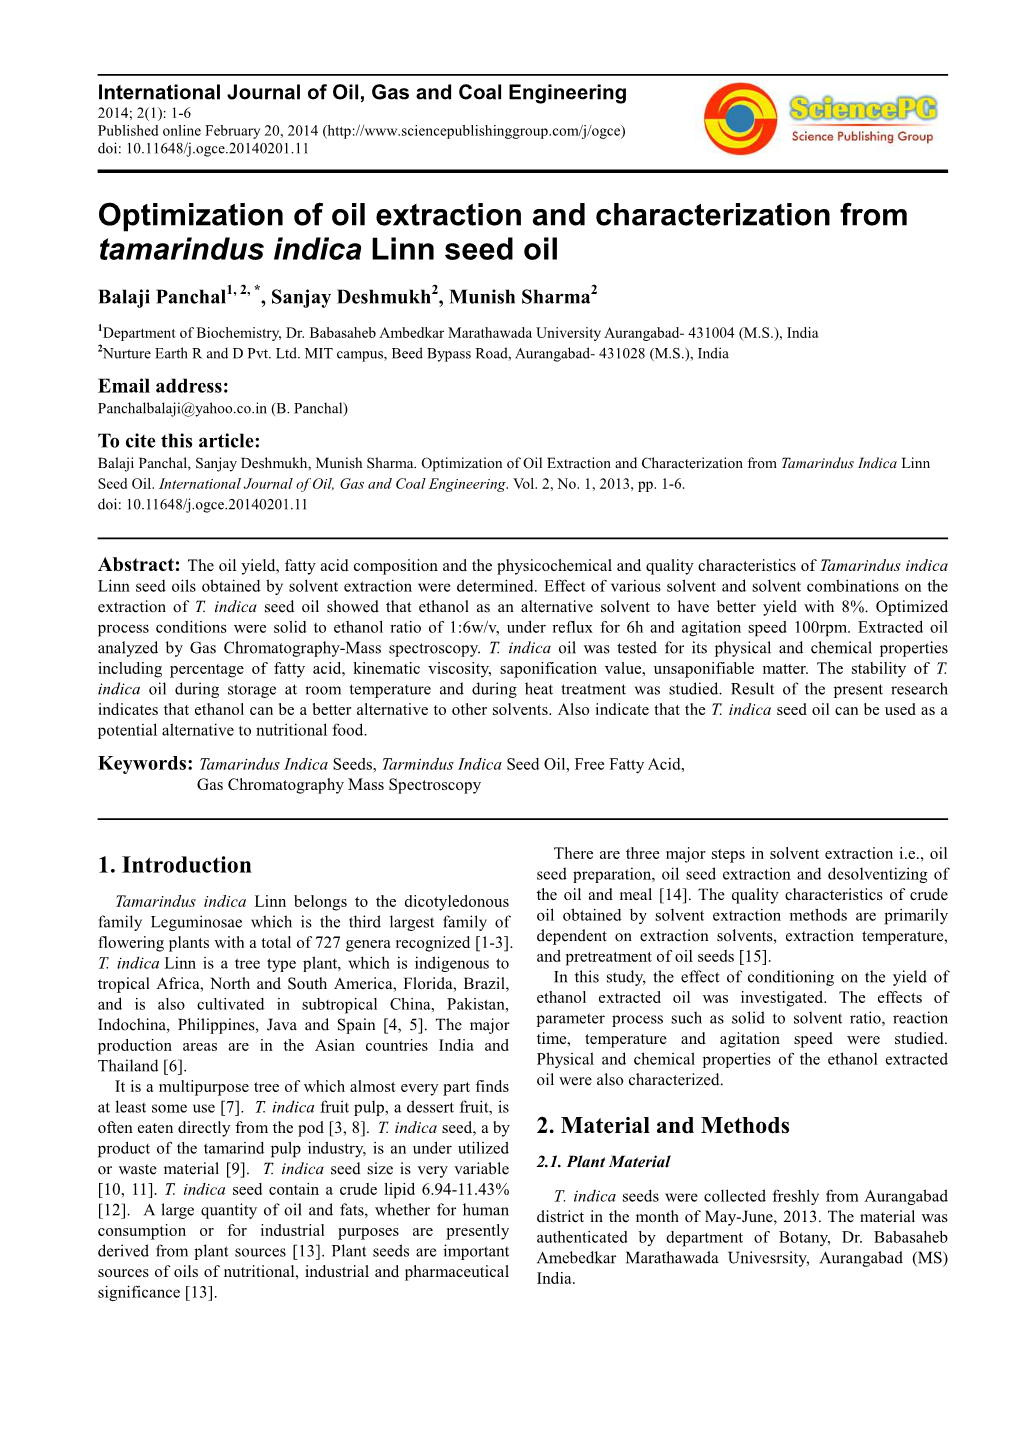 Optimization of Oil Extraction and Characterization from Tamarindus Indica Linn Seed Oil